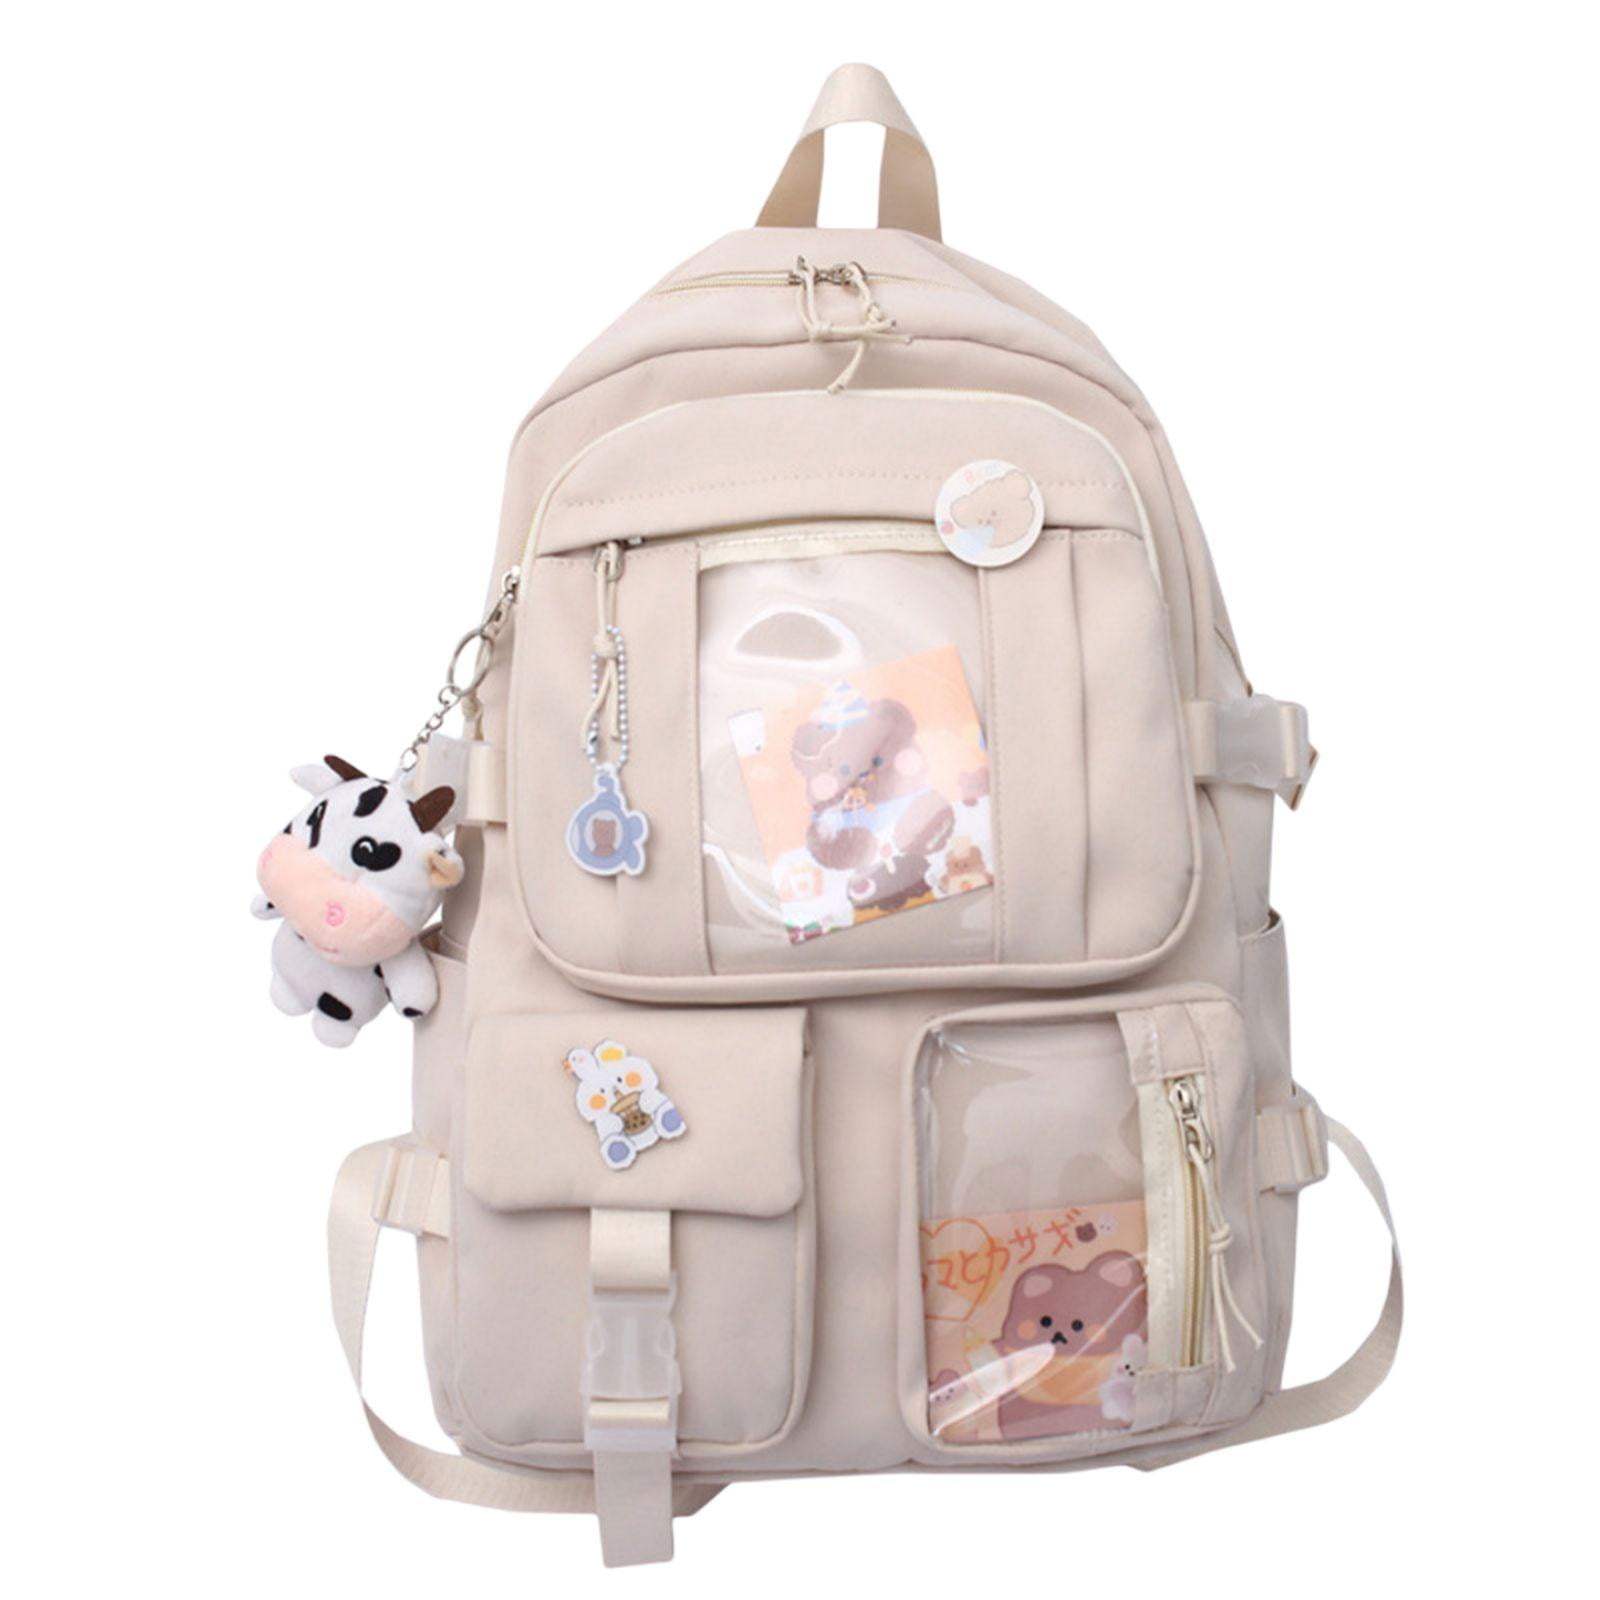 Cute Anime Backpack for Arknights, Contrasting Color Canvas Anime Game  Student Youth School Bag, 11.8×5.5×16.9 inches -D : Amazon.co.uk: Fashion